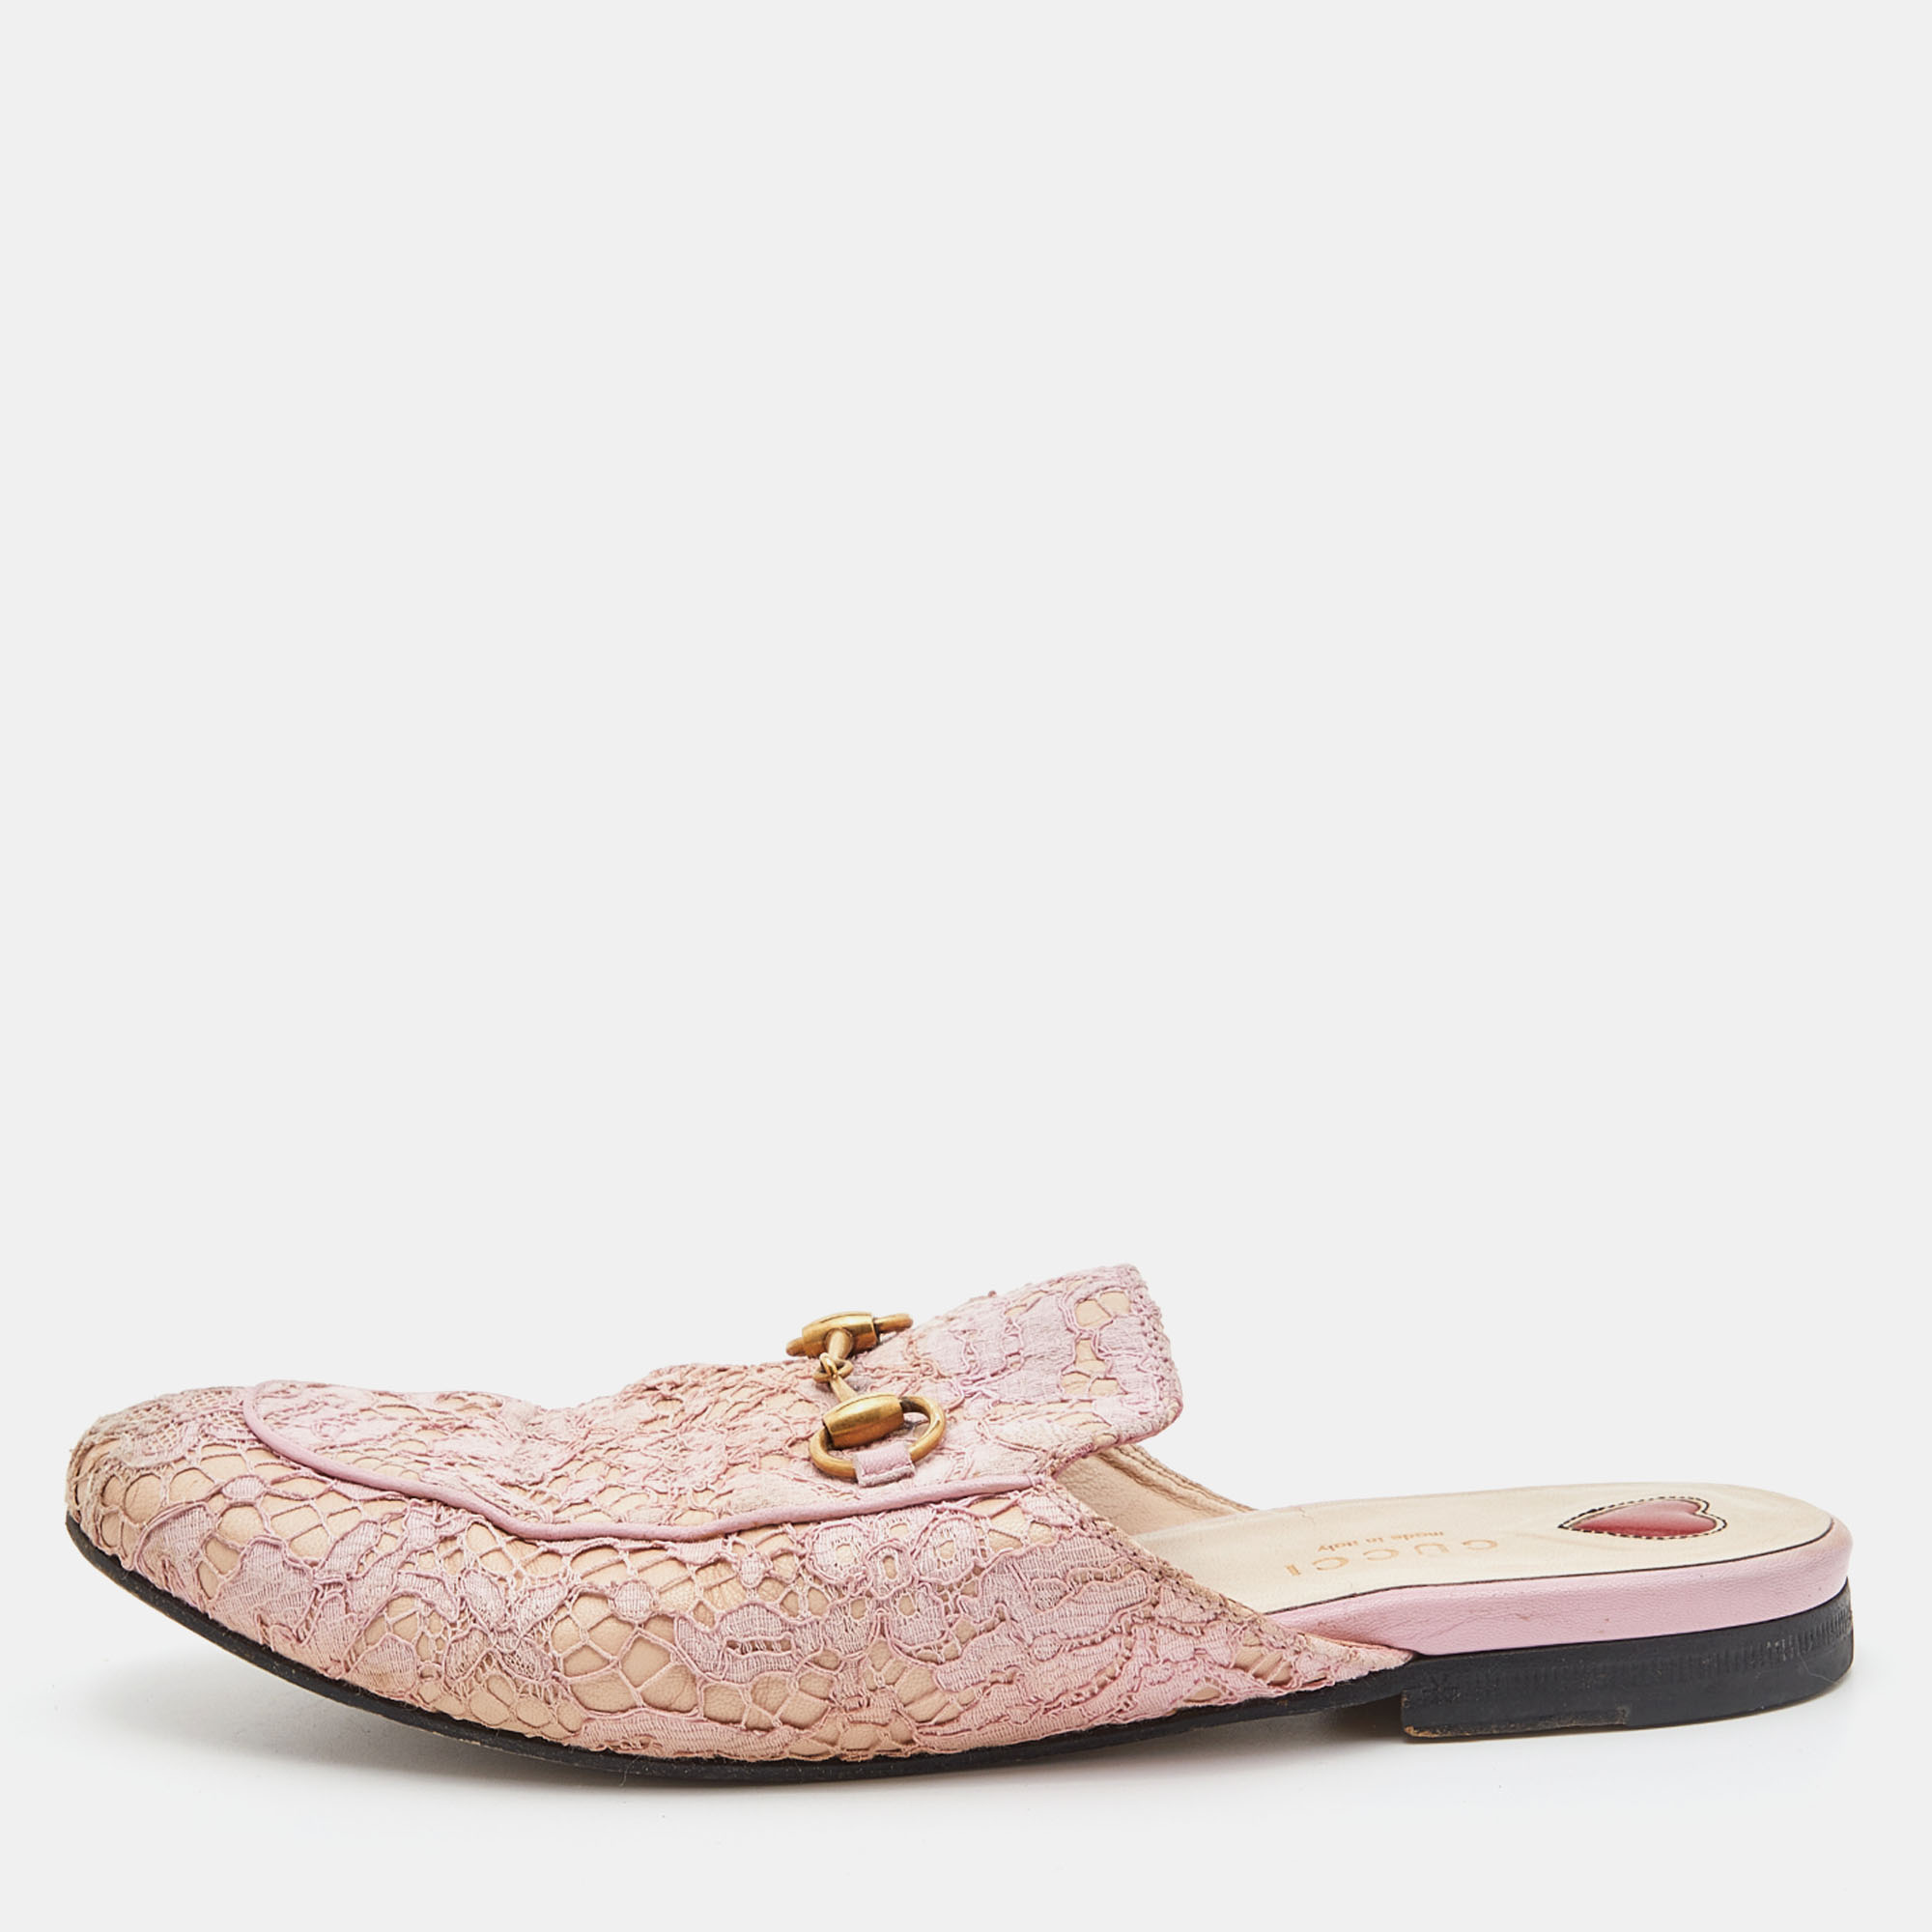 Gucci Pink Floral Lace And Leather Princetown Flat Mule Size 37.5